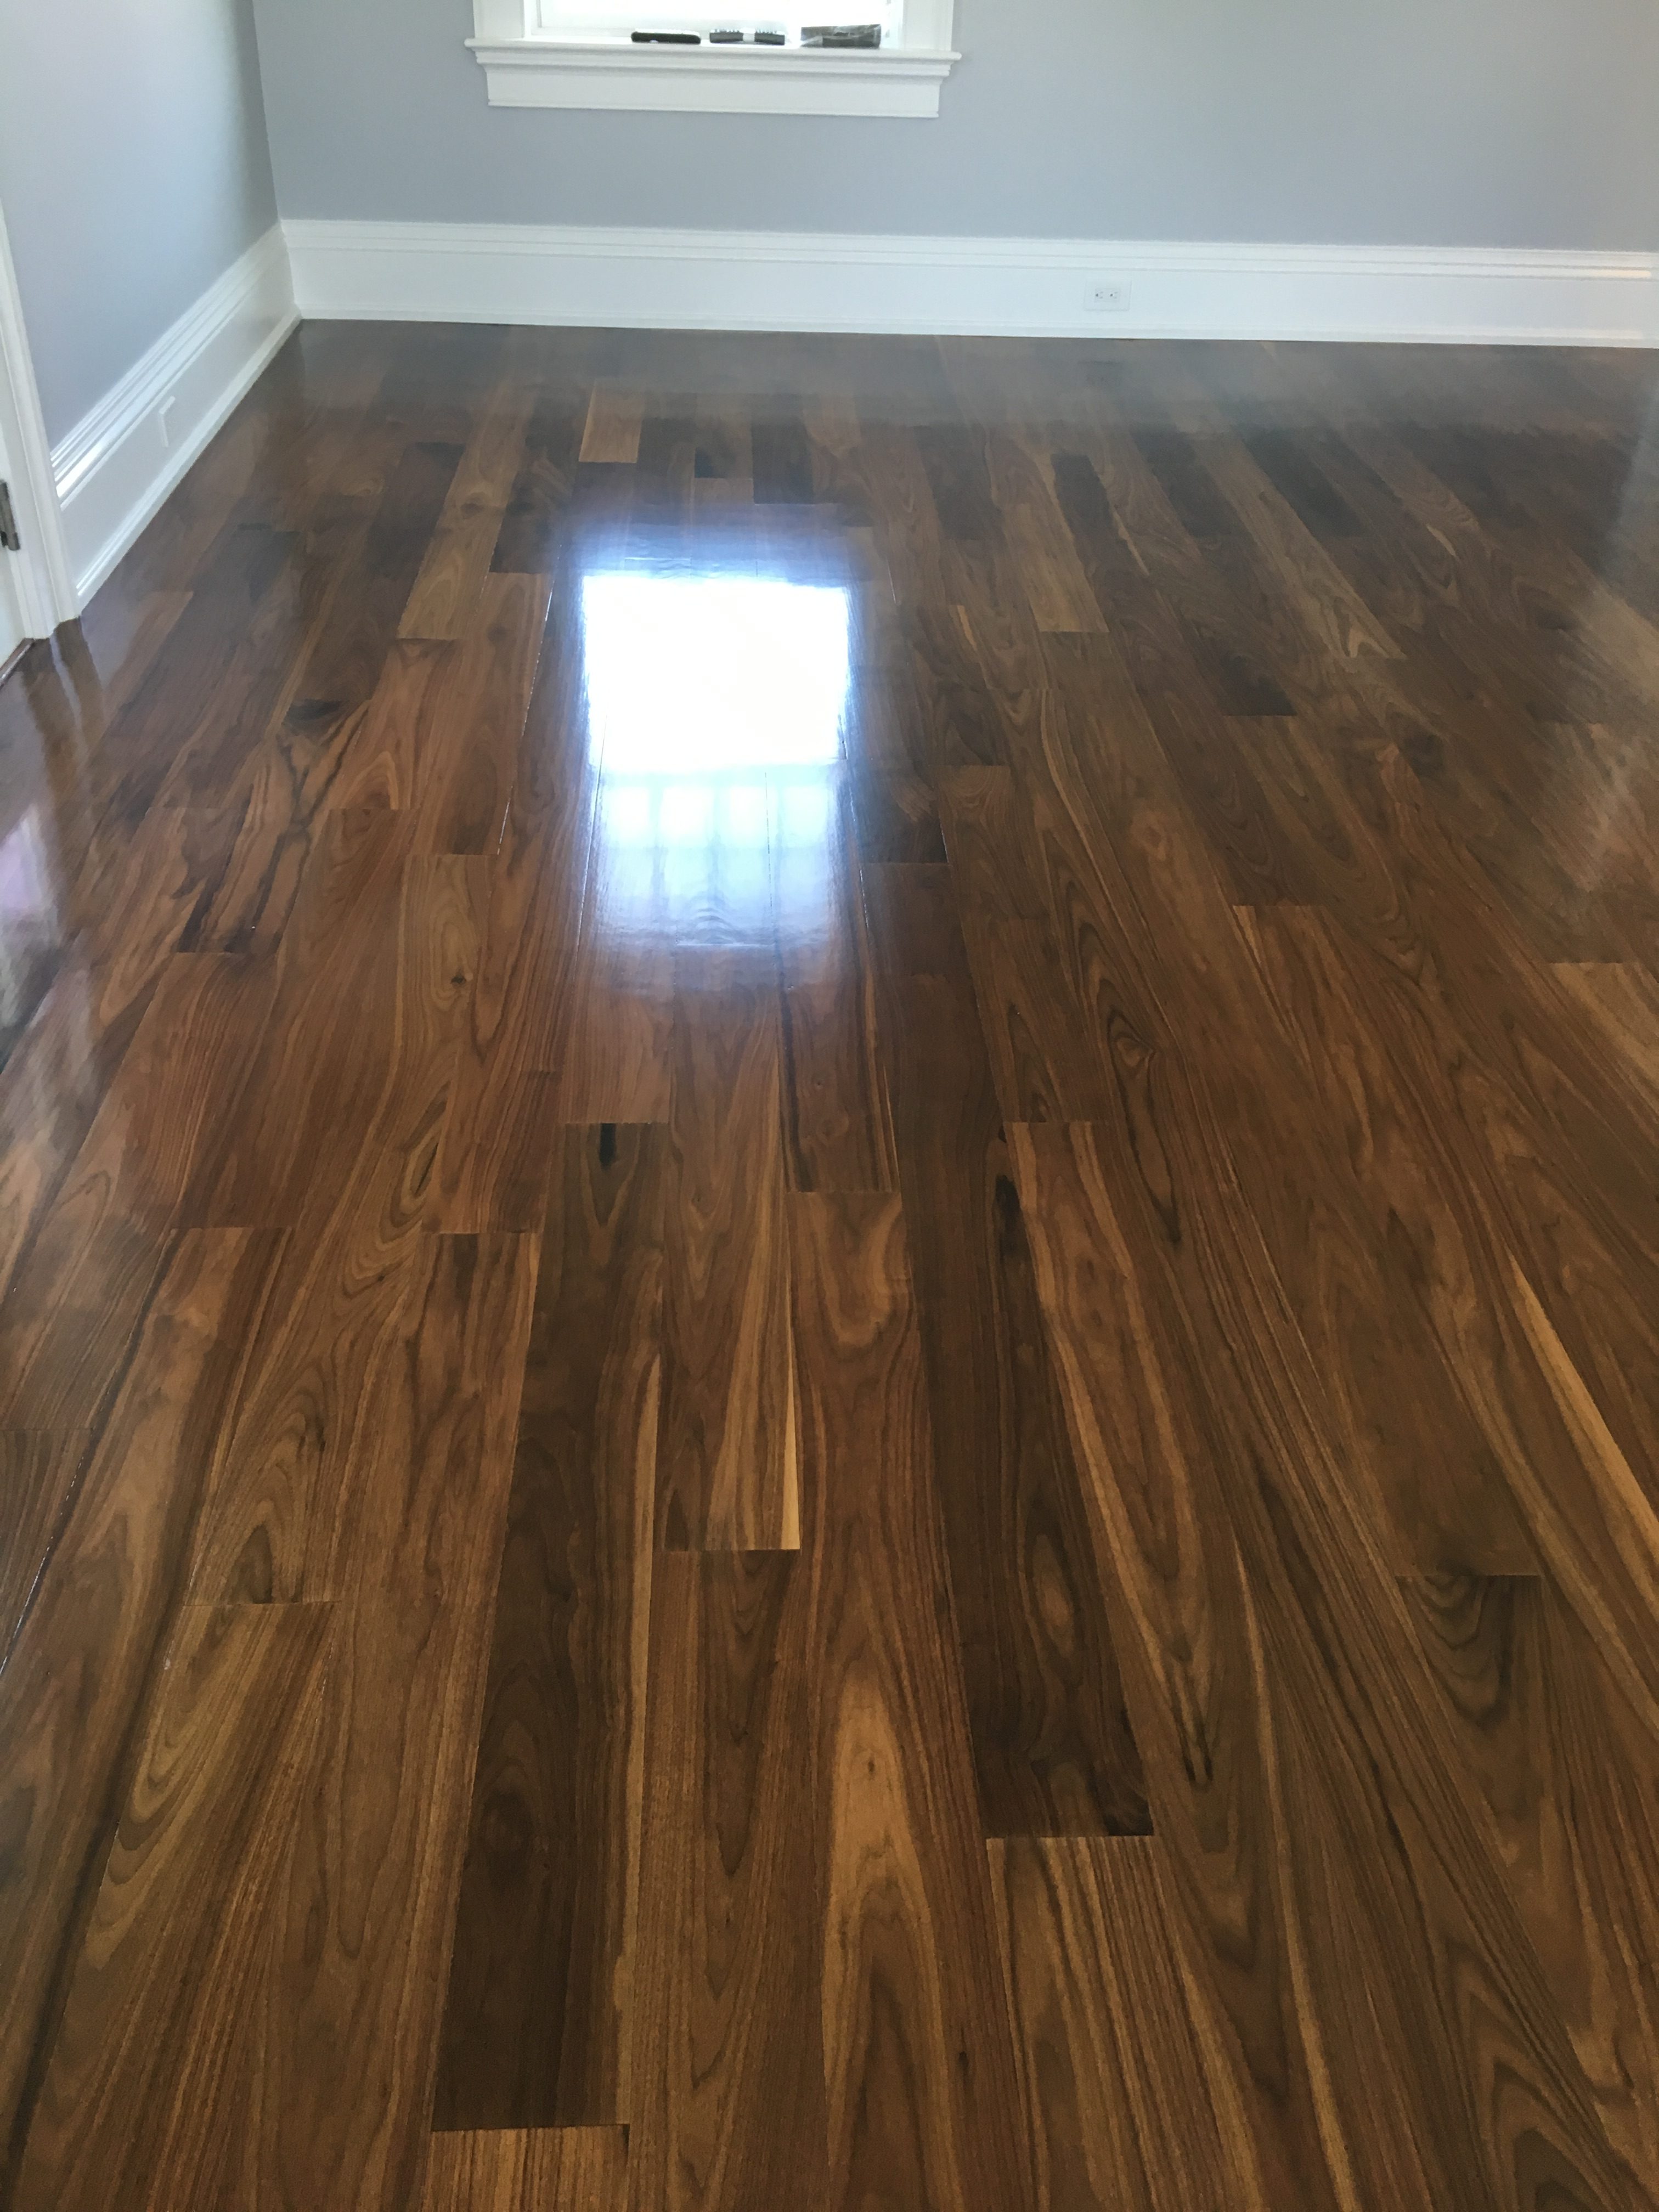 Polished wood flooring in New Jersey